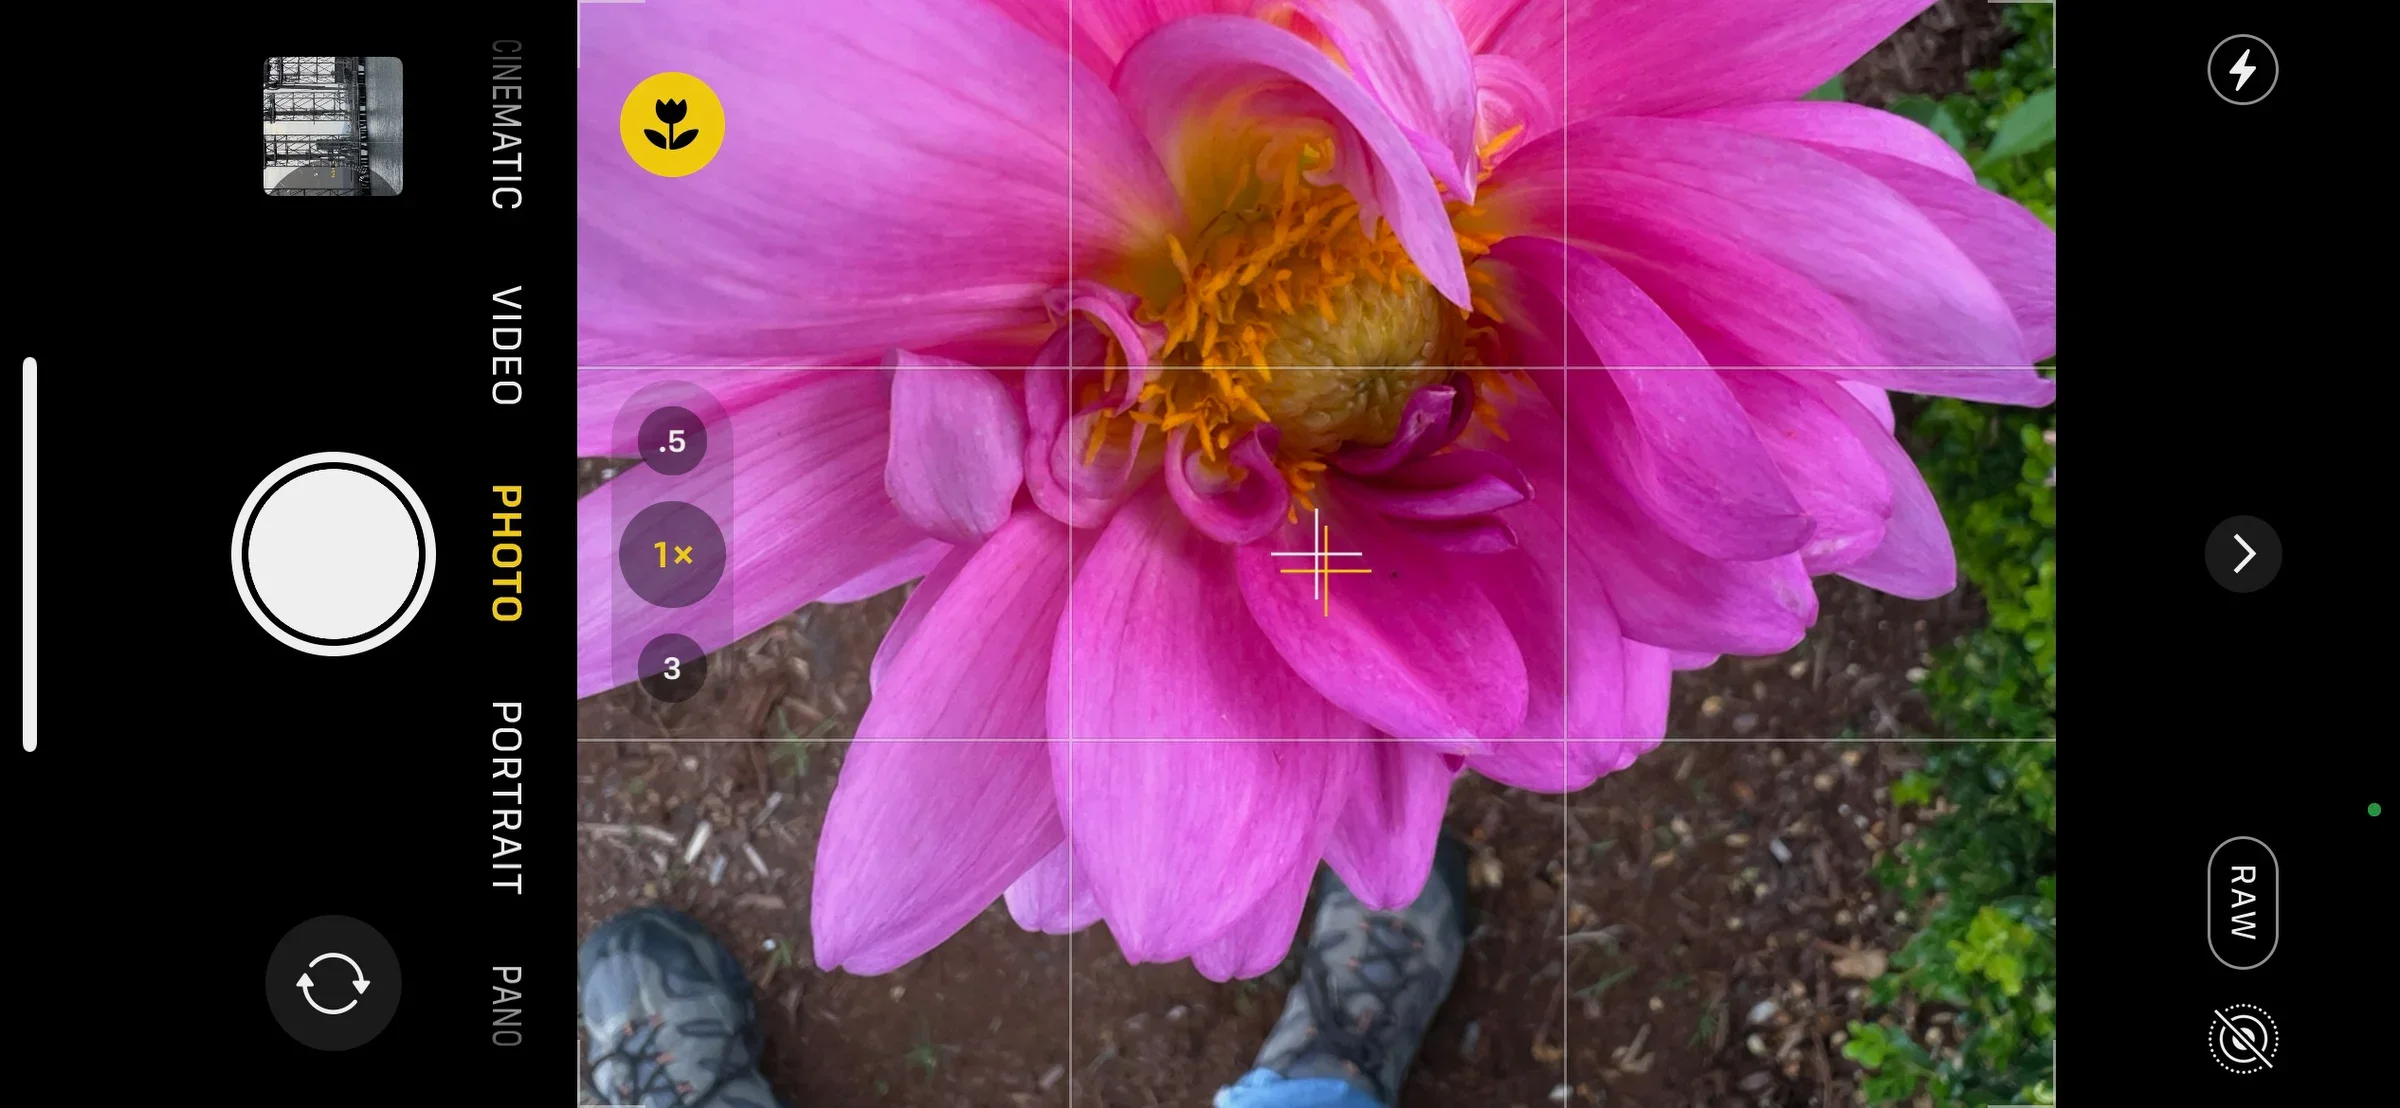 Your smartphone camera has great hidden features—here’s how to find them